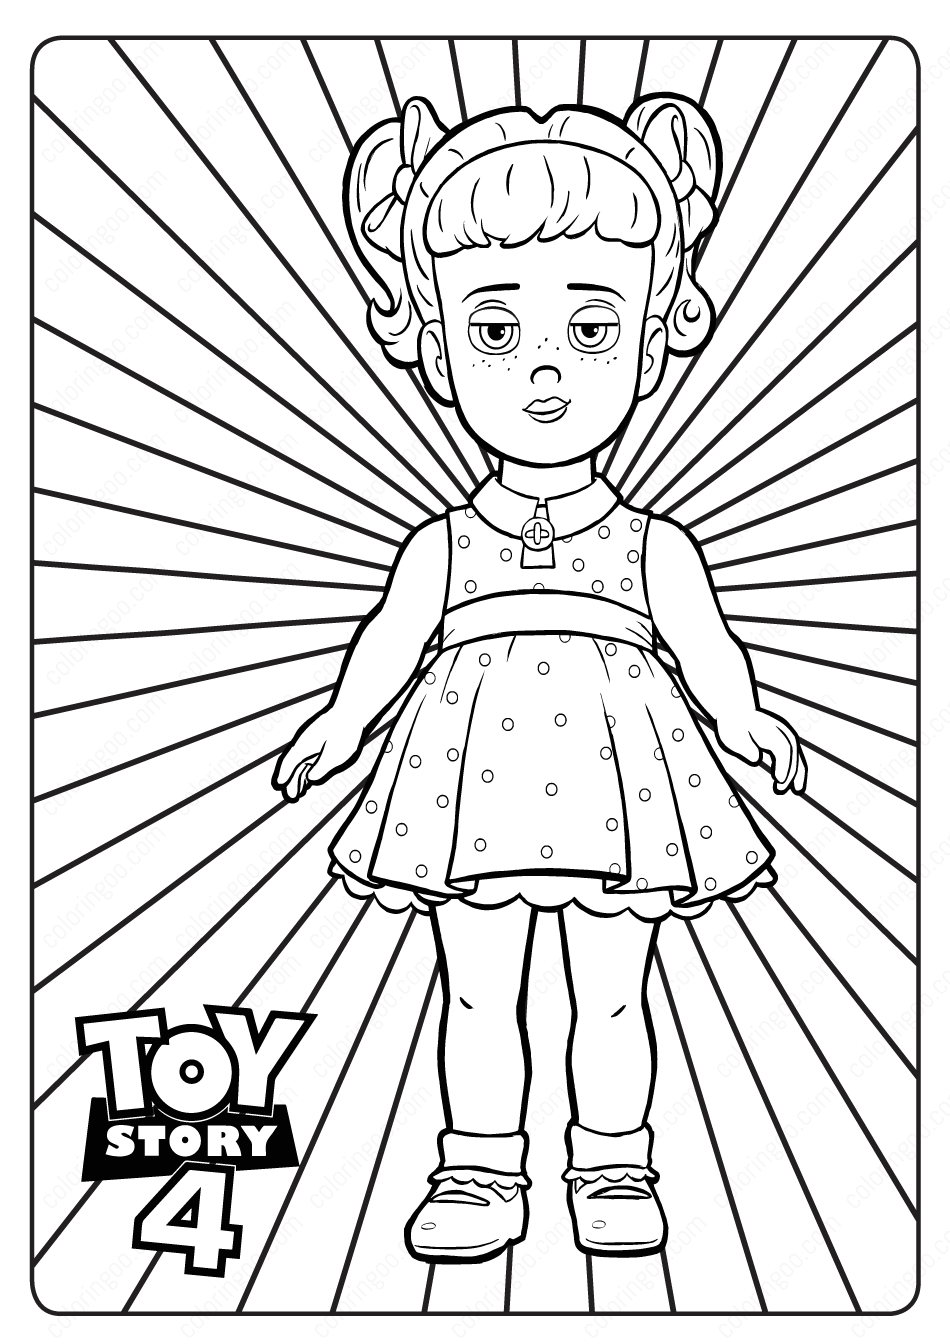 toy story 4 gabby gabby coloring pages 09